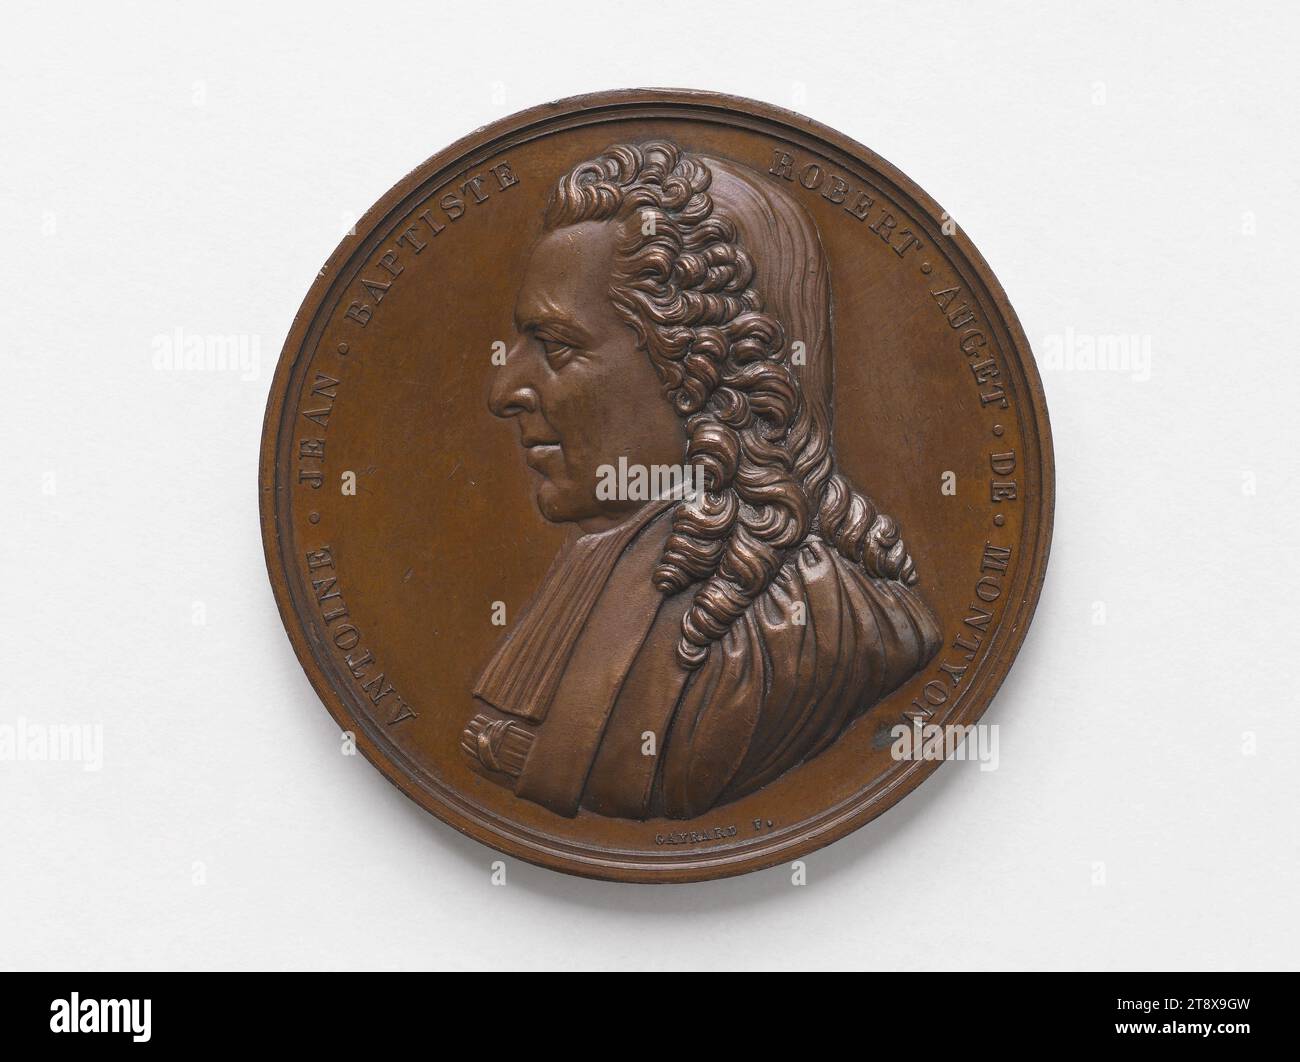 Medal awarded to Louis-Gabriel Mathieu dit Boisdoux, boatman from Montereau, recipient of the Montyon prize, virtue prize founded by Jean-Baptiste Antoine Auget, baron of Montyon (1733-1820), 1840, Gayrard, Raymond, In 1840, Numismatics, Medal, Dimensions - Work: Diameter: 5.2 cm, Weight (type dimension): 61.78 g Stock Photo